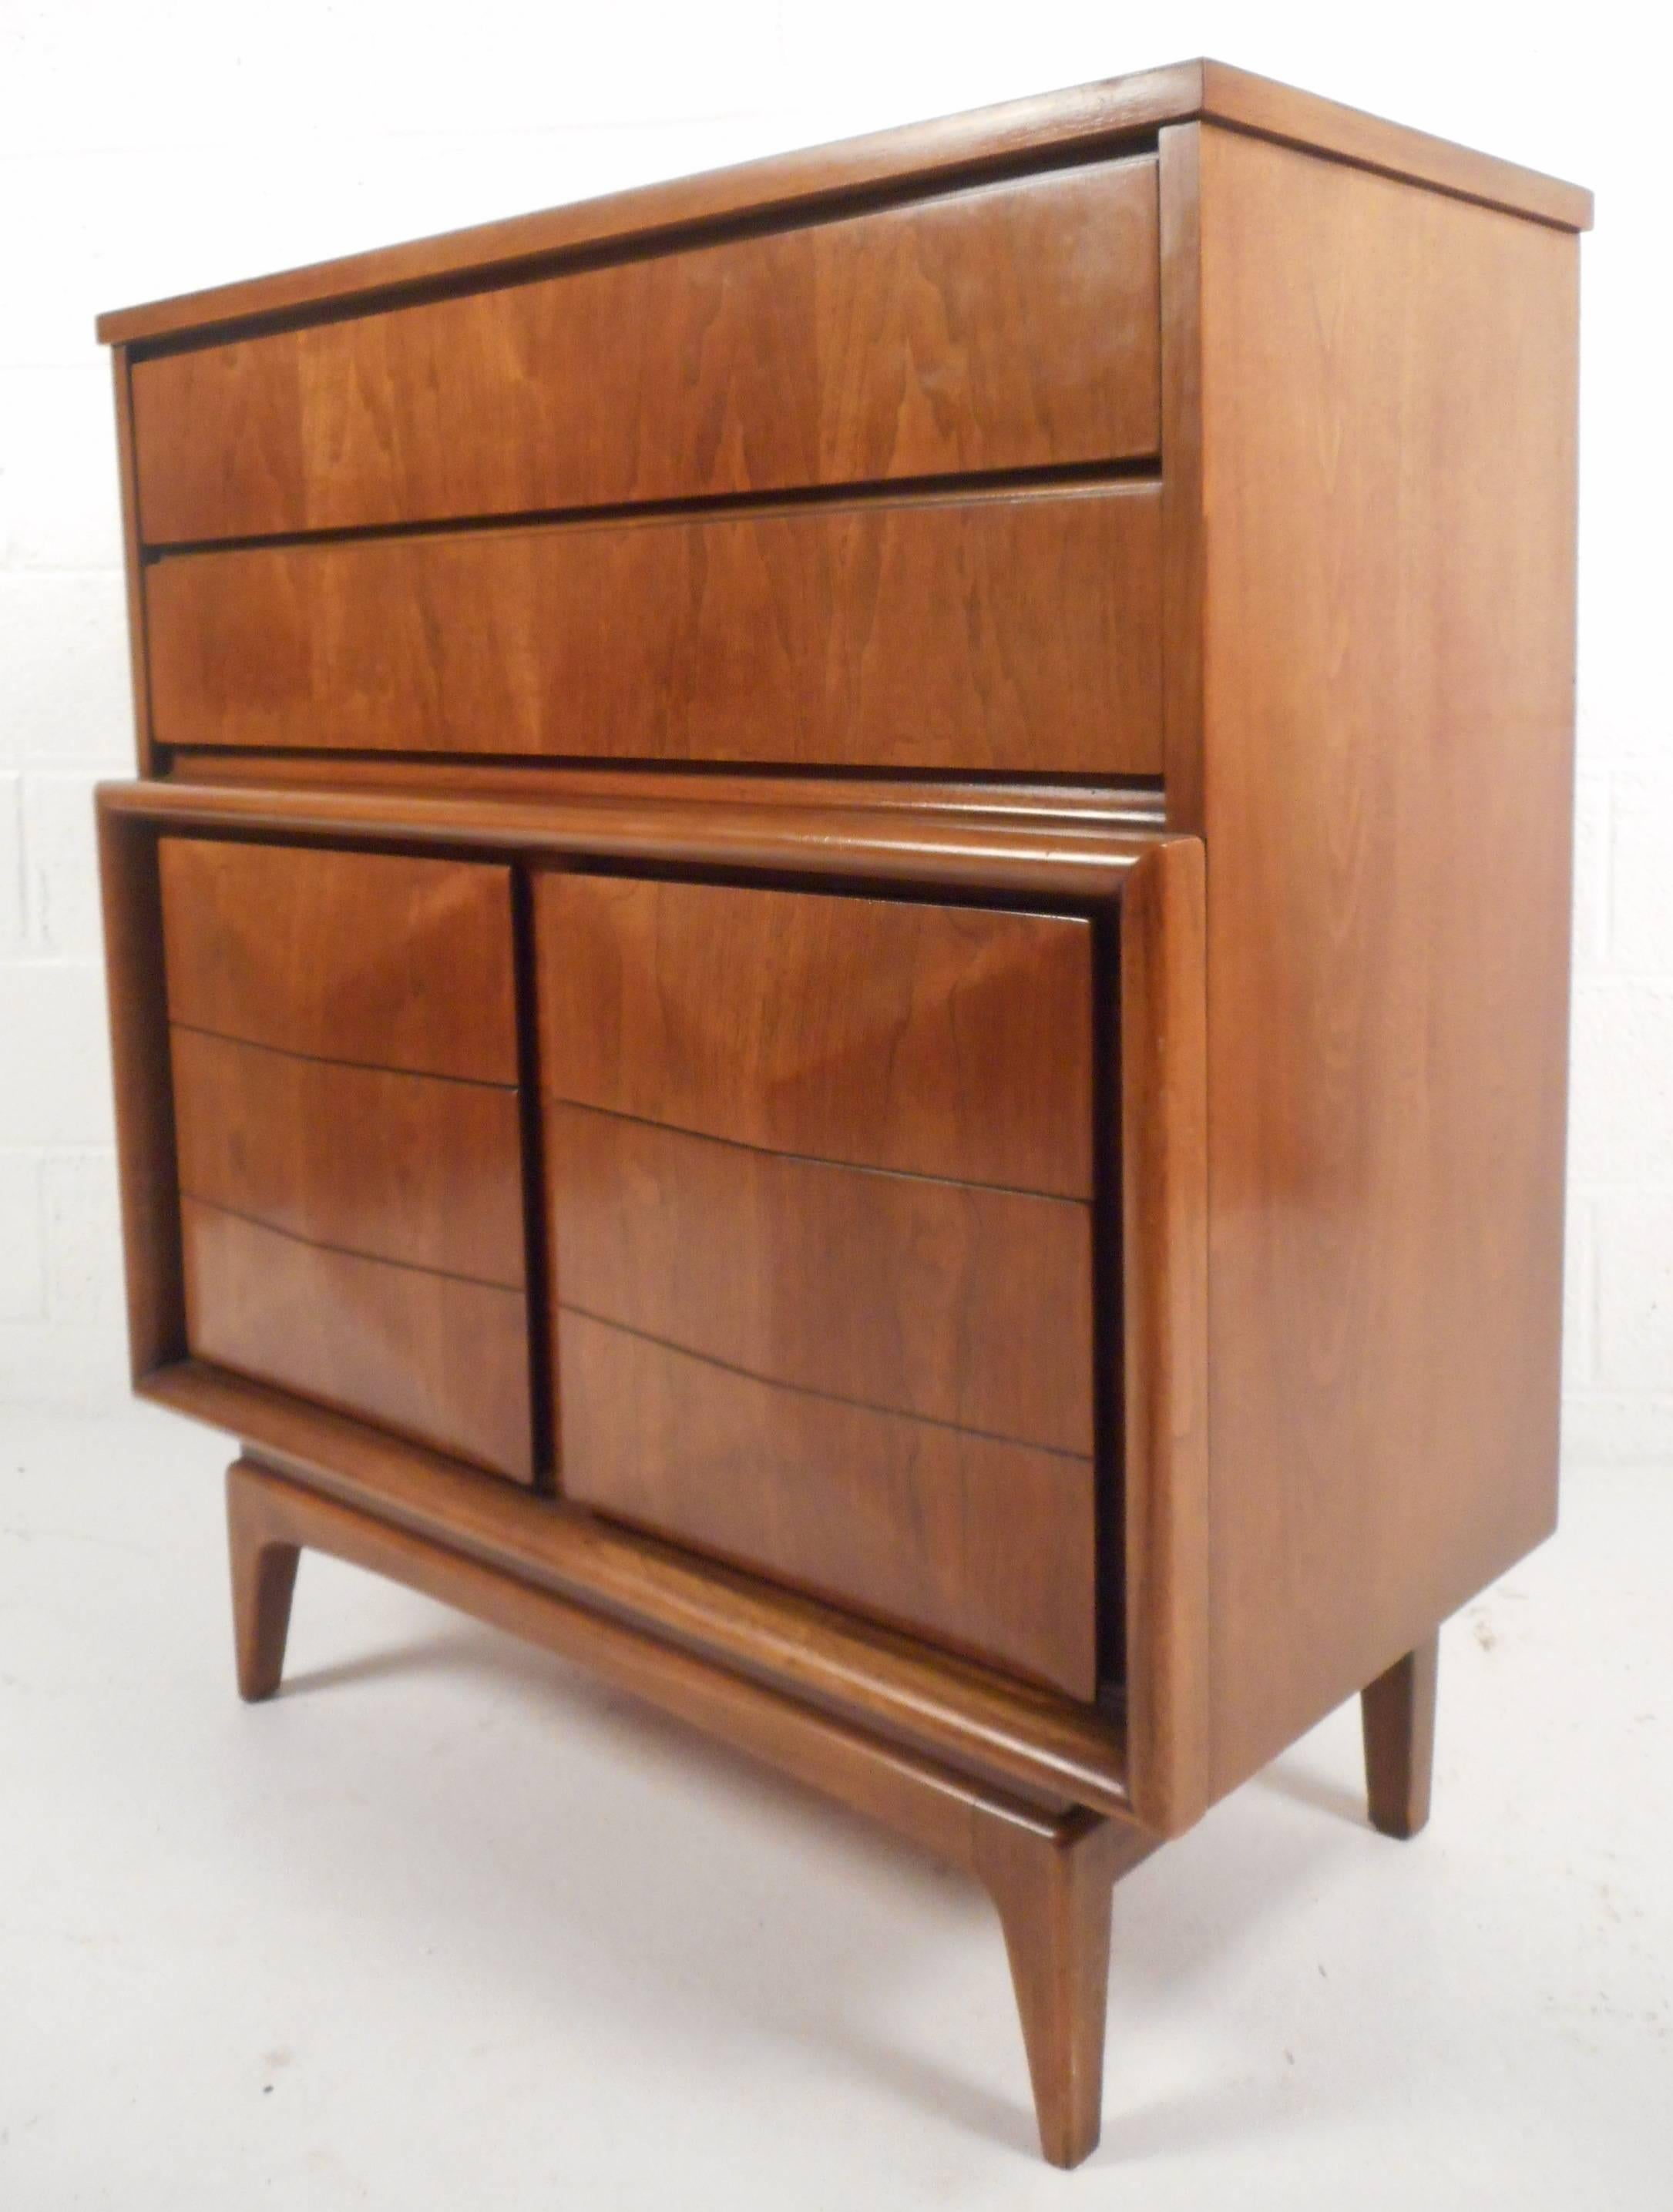 This stunning vintage modern bedroom set includes a nine drawer dresser with a mirror and a matching six drawer high boy. Sleek design with oak trim and a sculpted "diamond" front. This impressive set provides plenty of room for storage